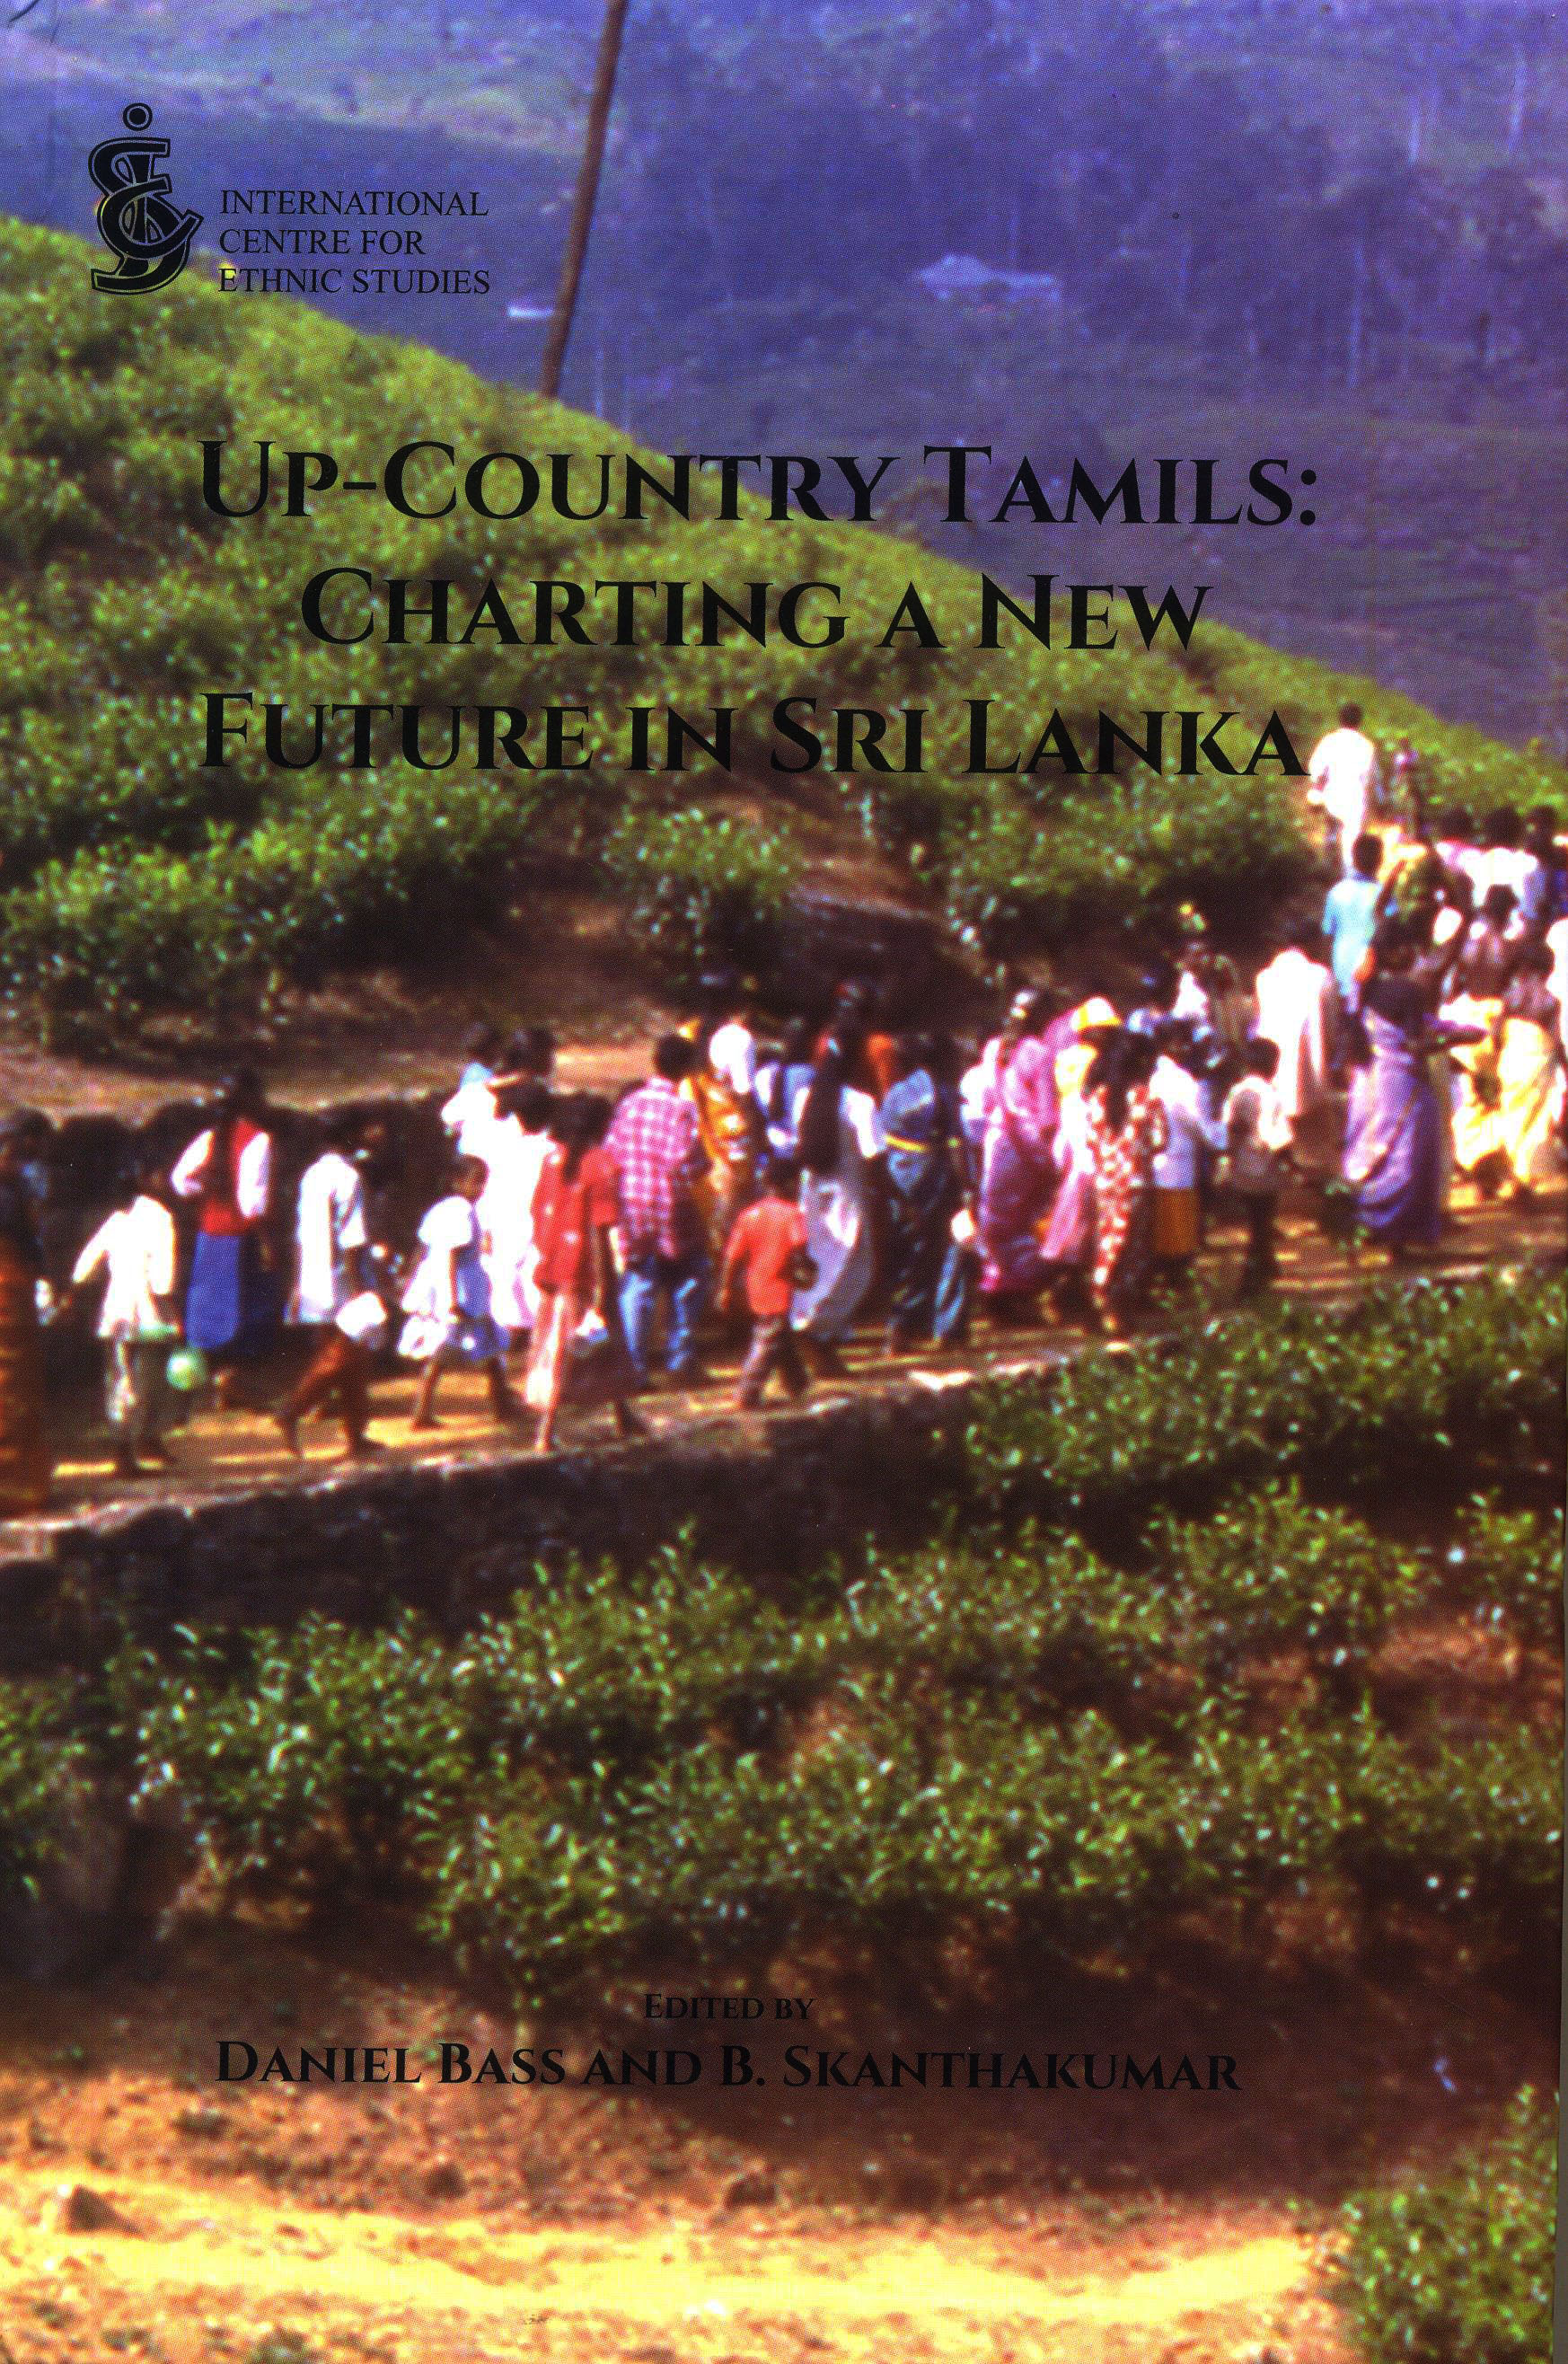 Up-Country Tamils:Charting A New Future In Sri Lanka